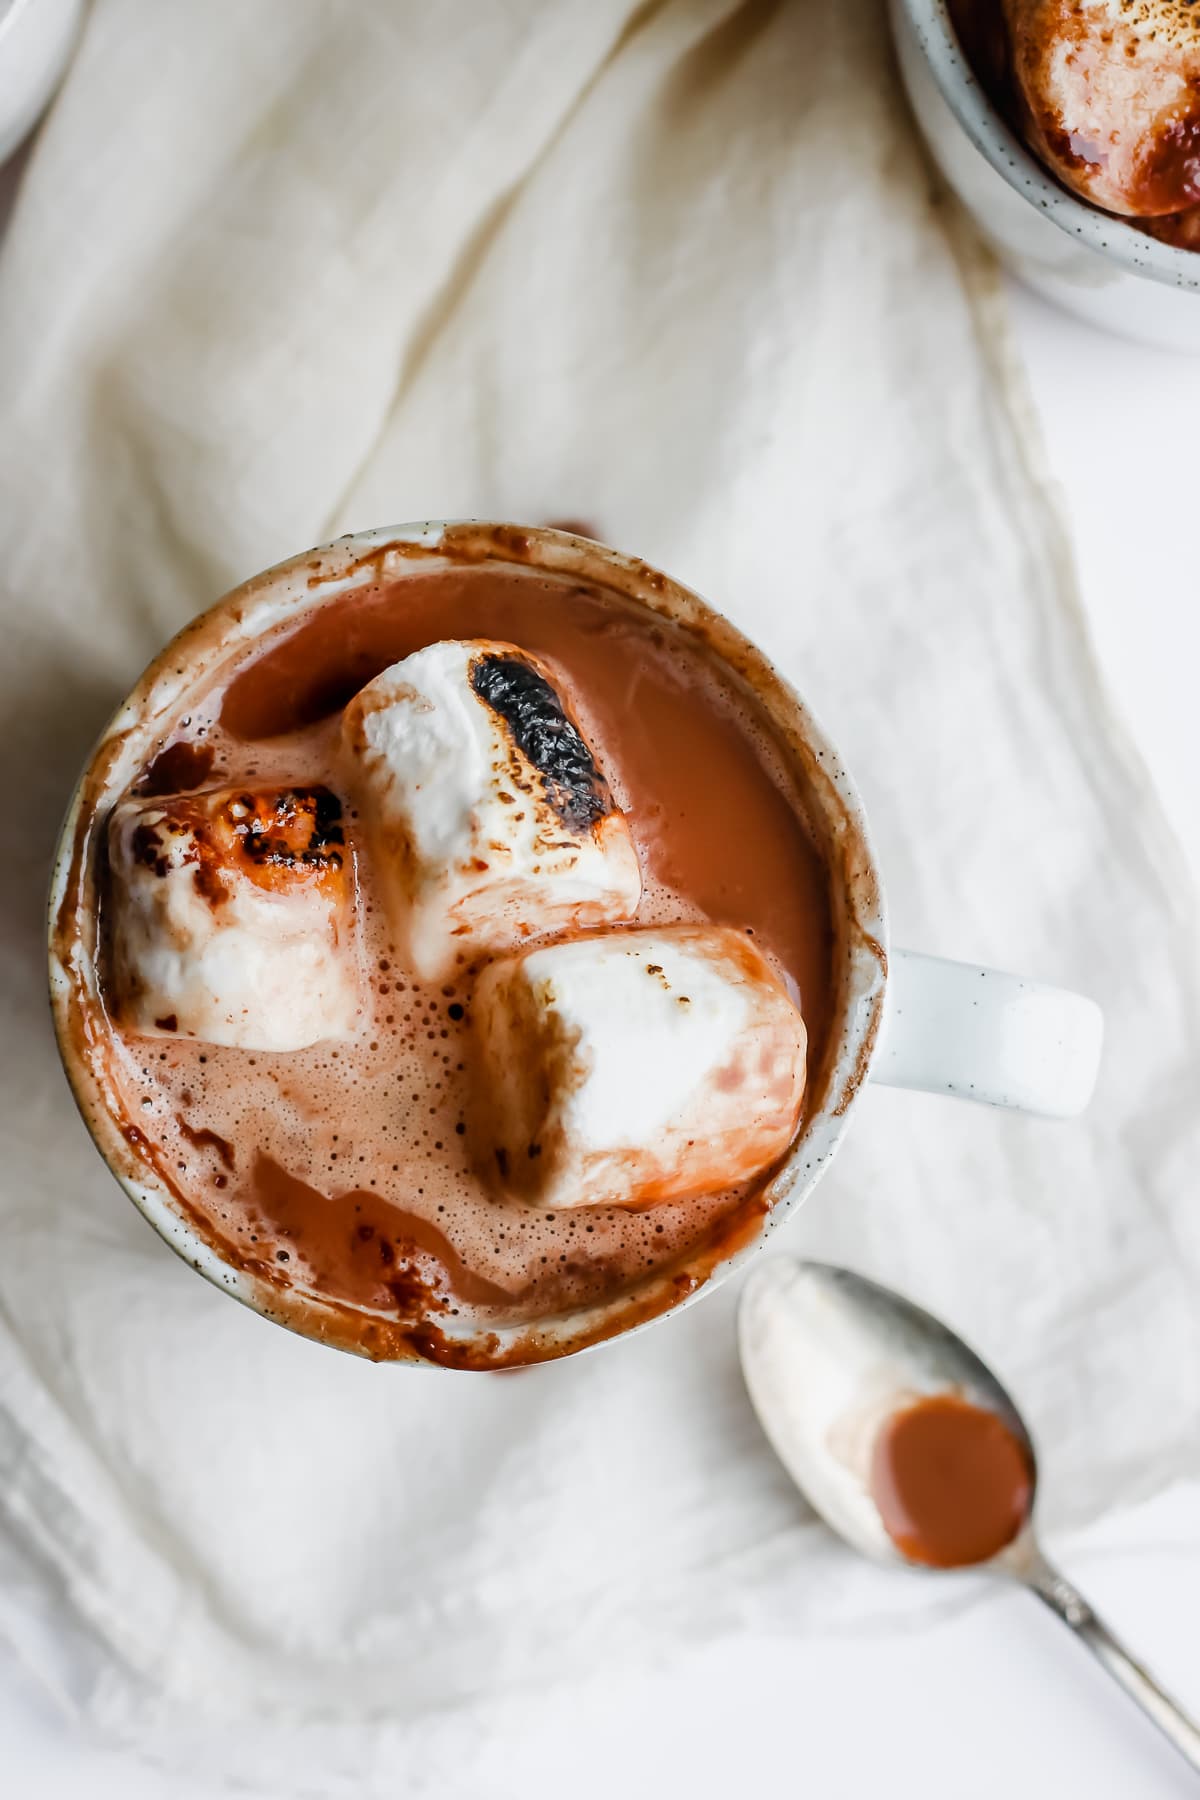 Top shot of hot chocolate in mug with marshmallows on top.